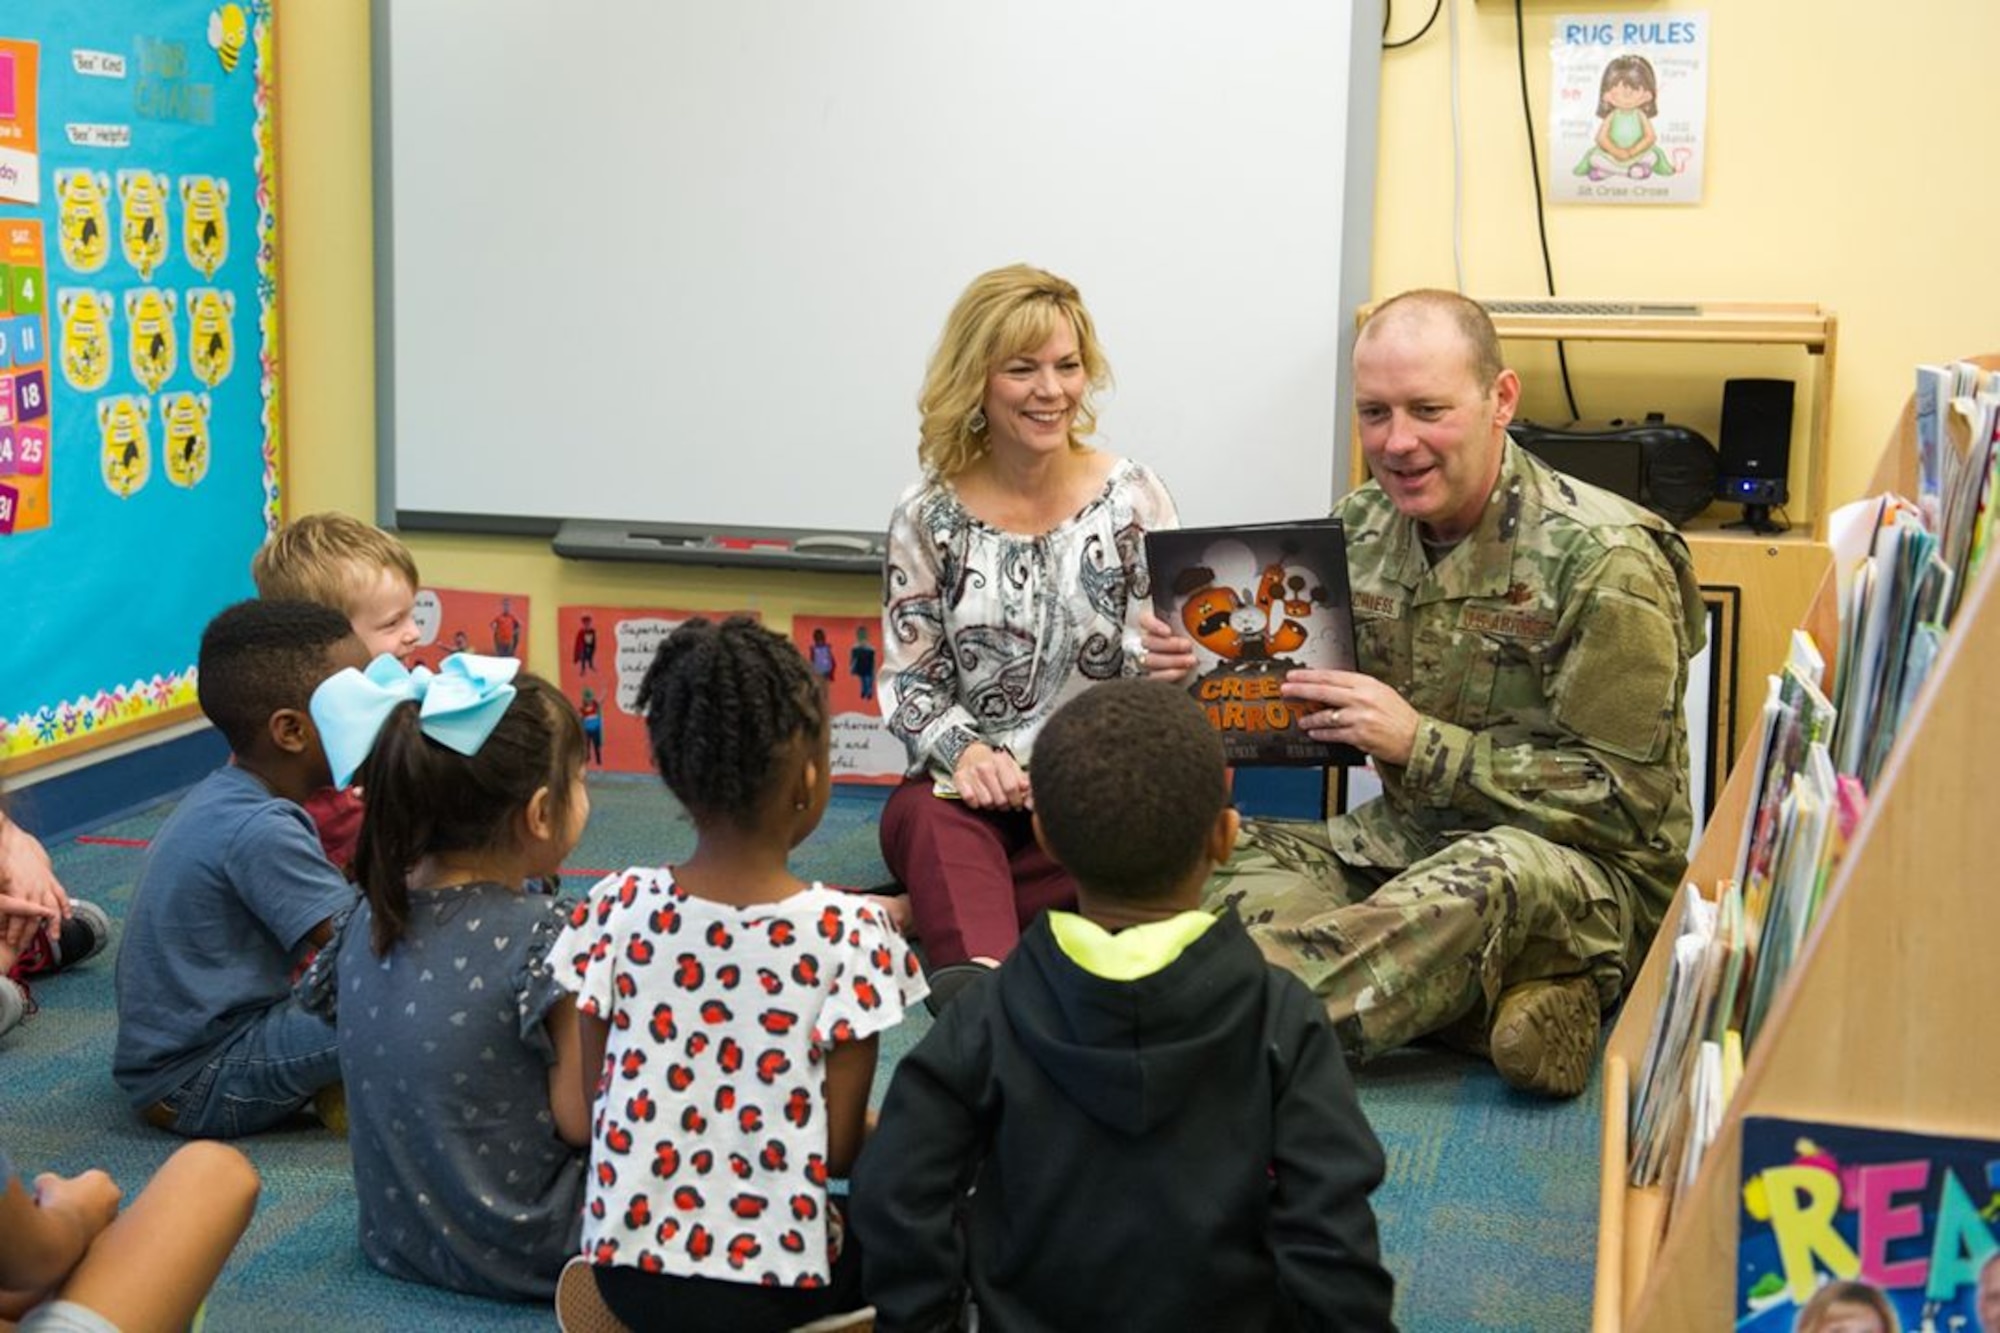 Brig. Gen. Doug Schiess, 45th Space Wing commander, and Mrs. Debbie Schiess, Key Spouse mentor, read to children to support literacy in January of 2020. Many online sources are available to continue our child's learning during the COVID-19 pandemic, such as the 45th SW School Liaison Office. (U.S. Air Force photo by Joshua Conti)